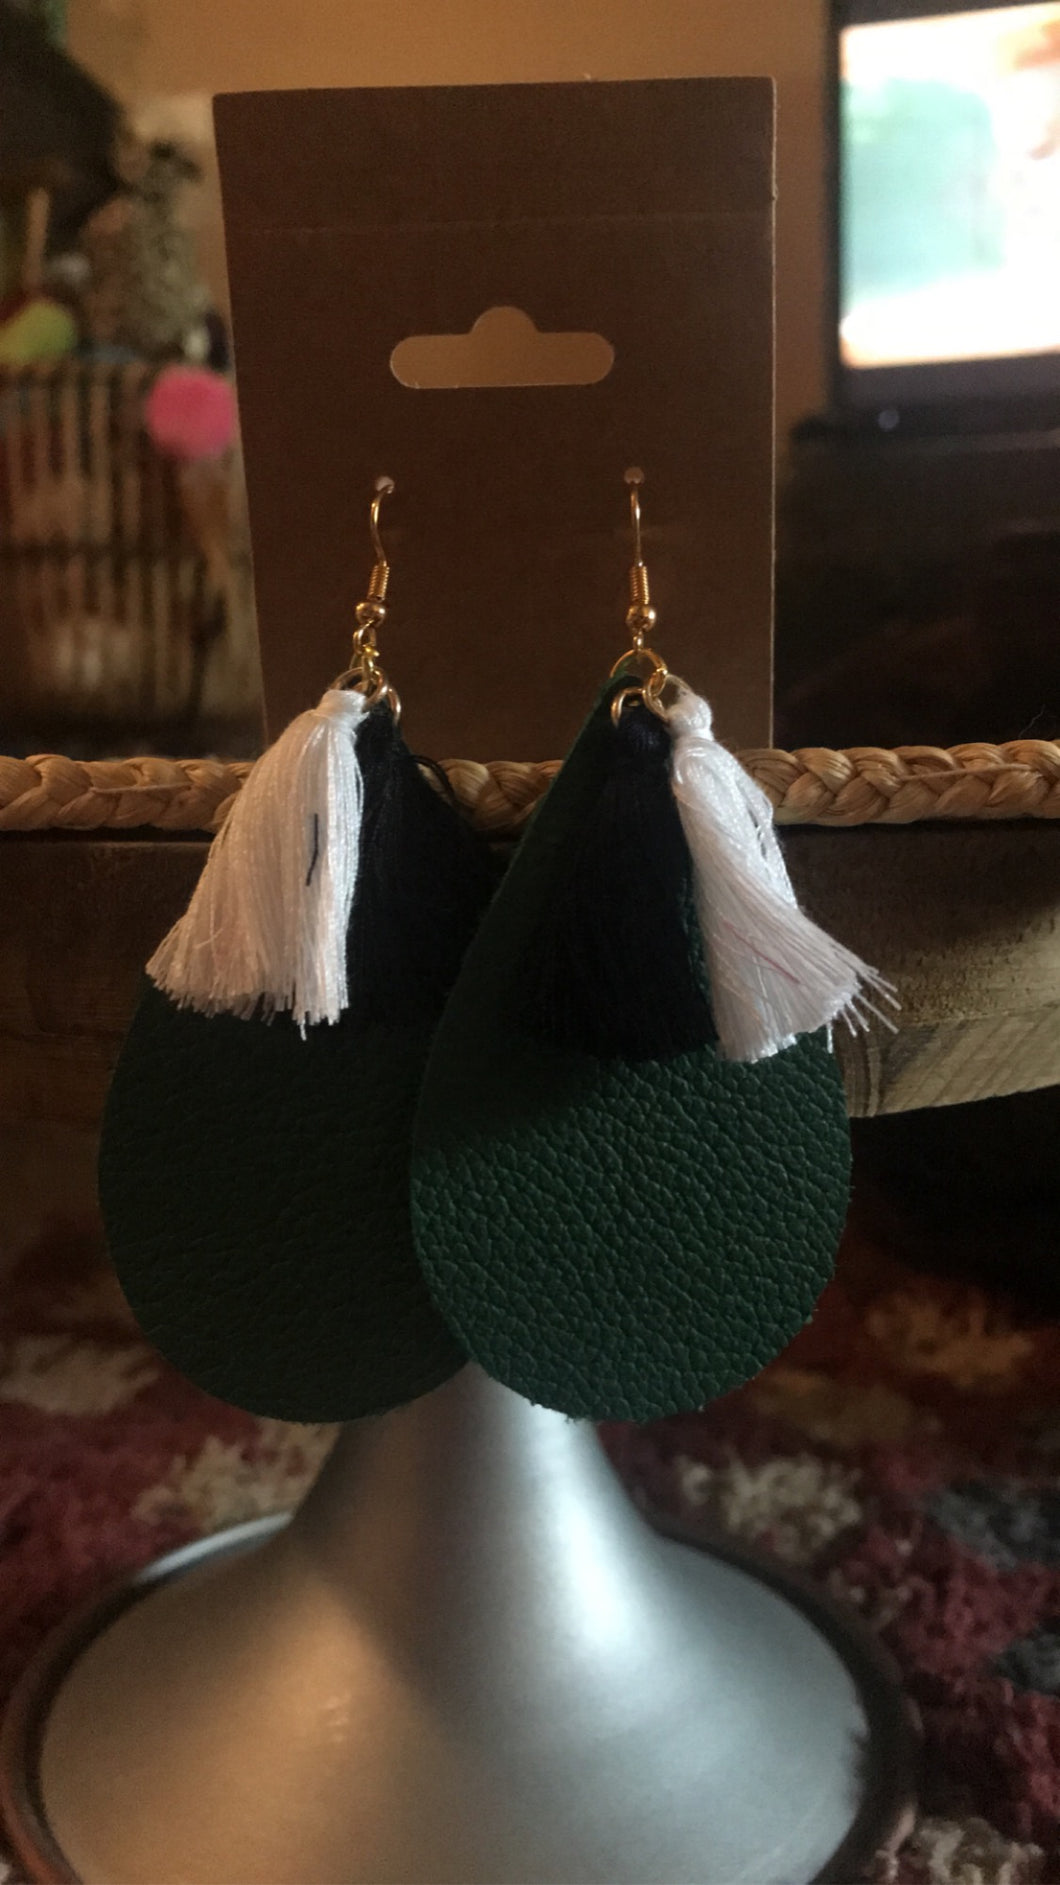 Green with Black and White Earrings